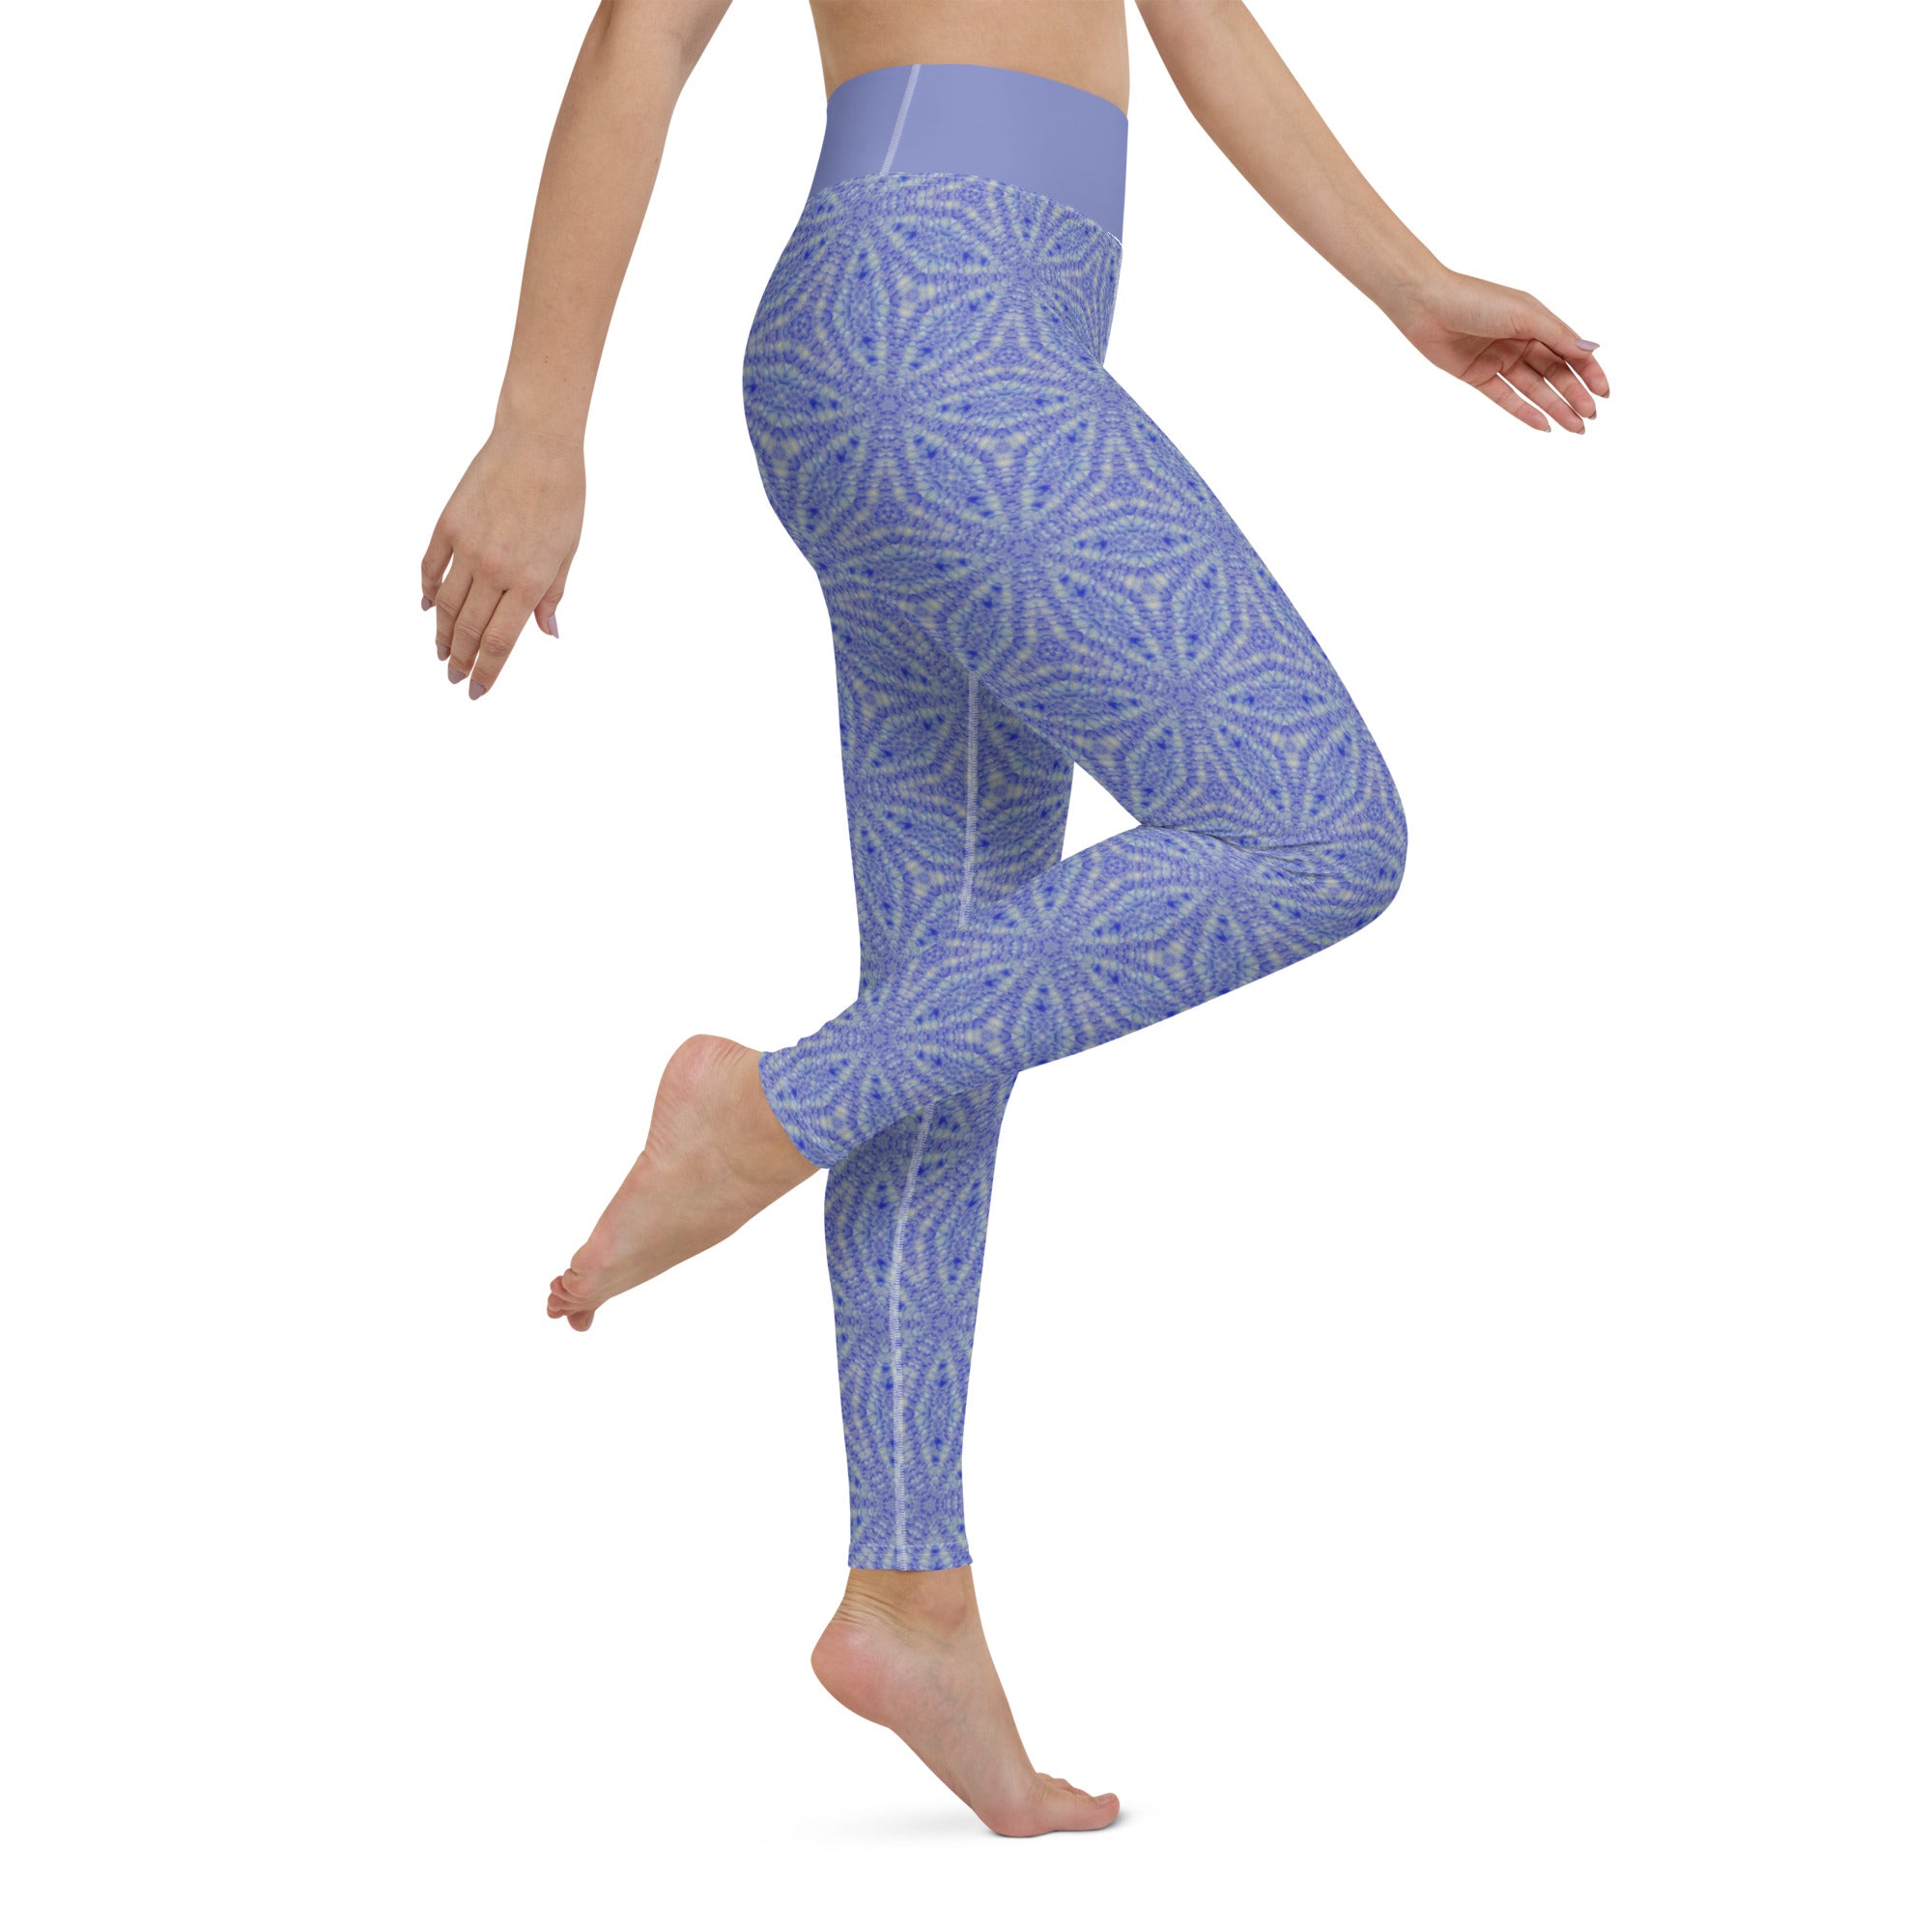 Eco-friendly Serene Ocean Waves Yoga Leggings, ideal for a sustainable yoga practice.